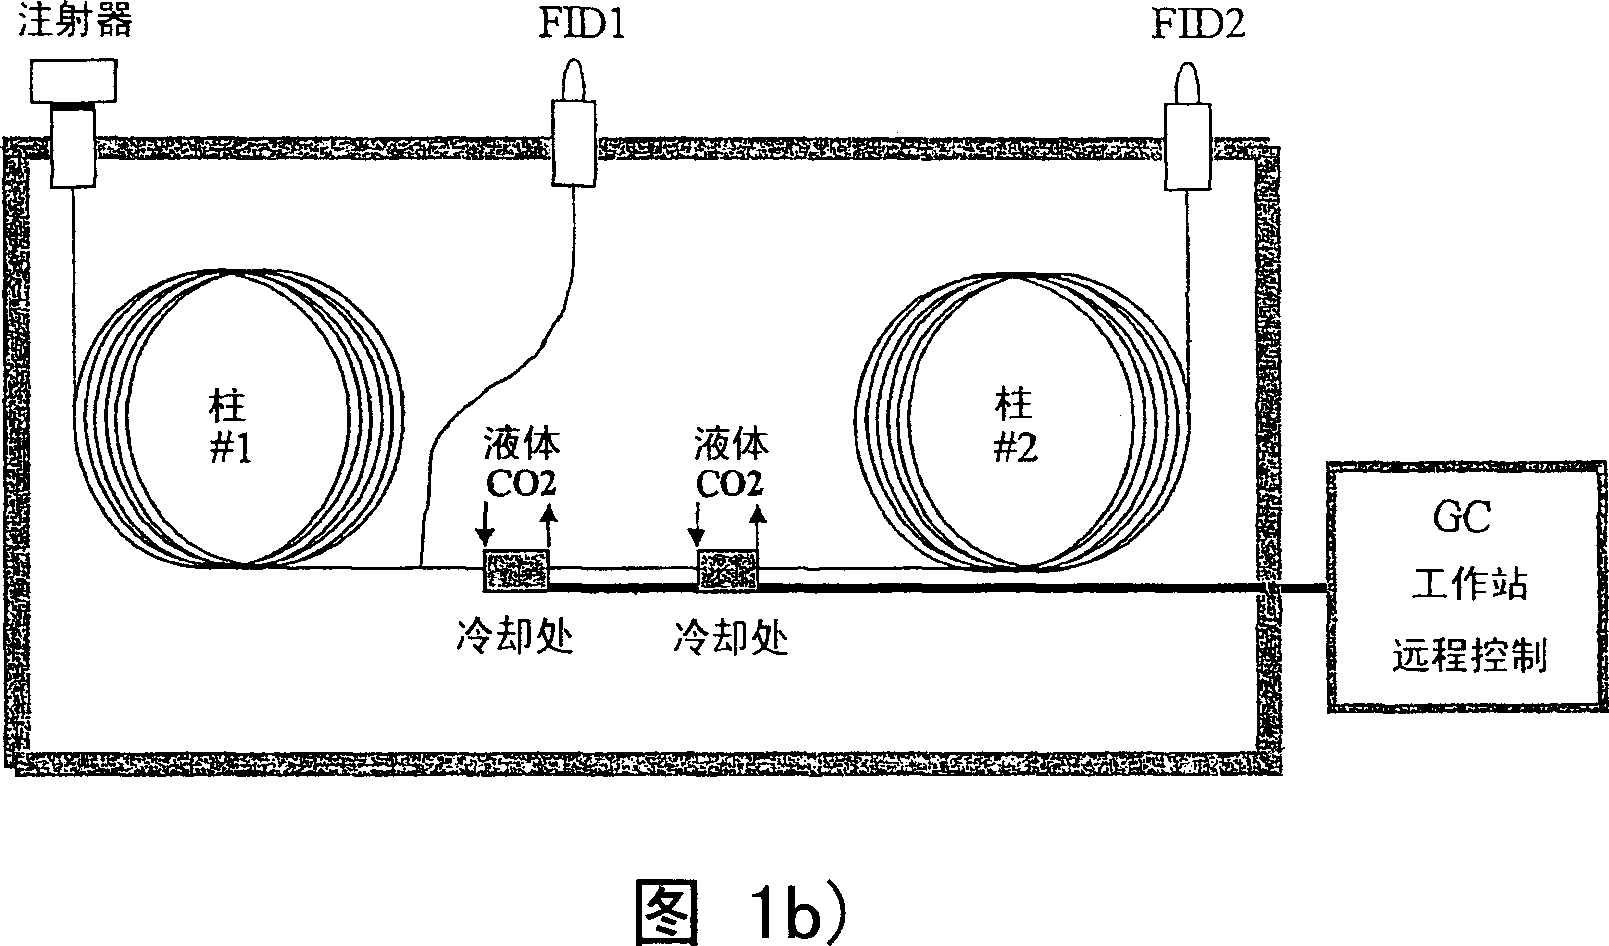 Novel multiple-dimension gas phase chromatographic device and analyte conveying method using multiple cooling wire connections